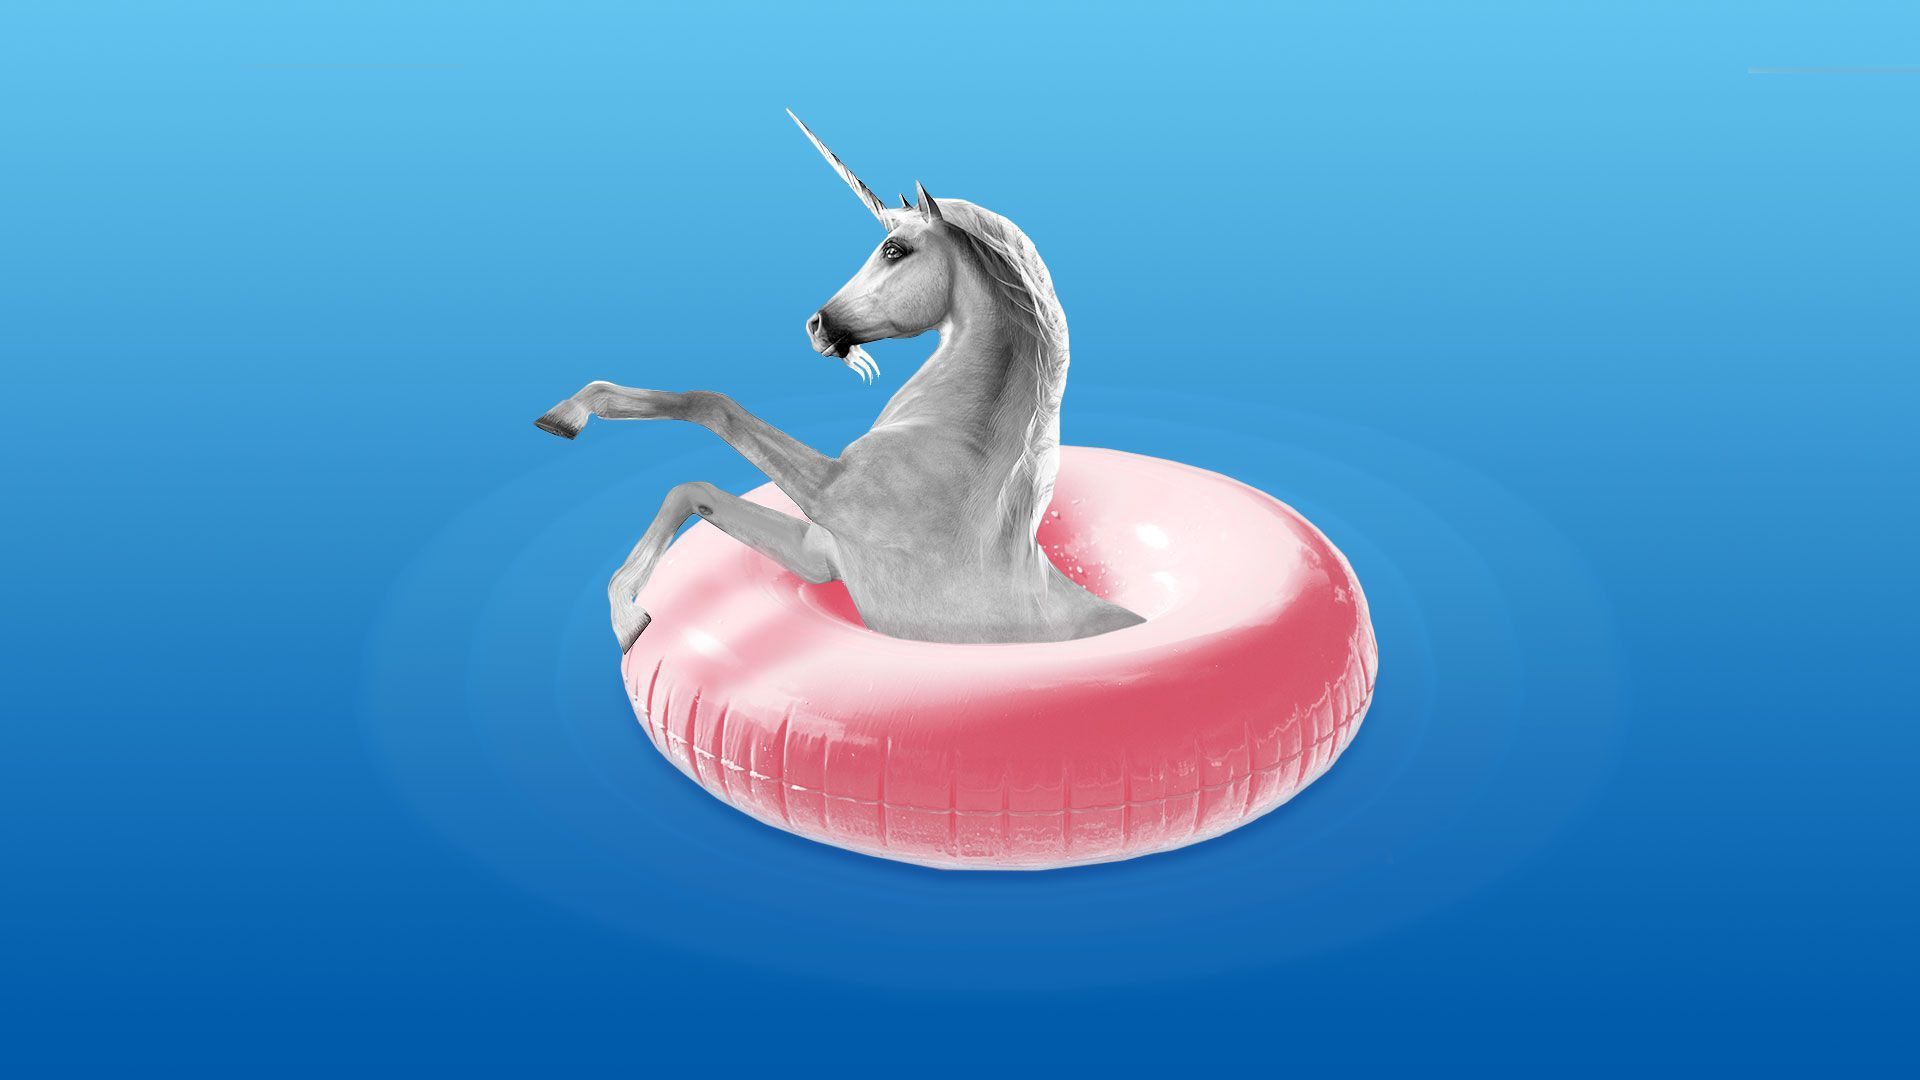 Illustration of a unicorn in a pool floaty.